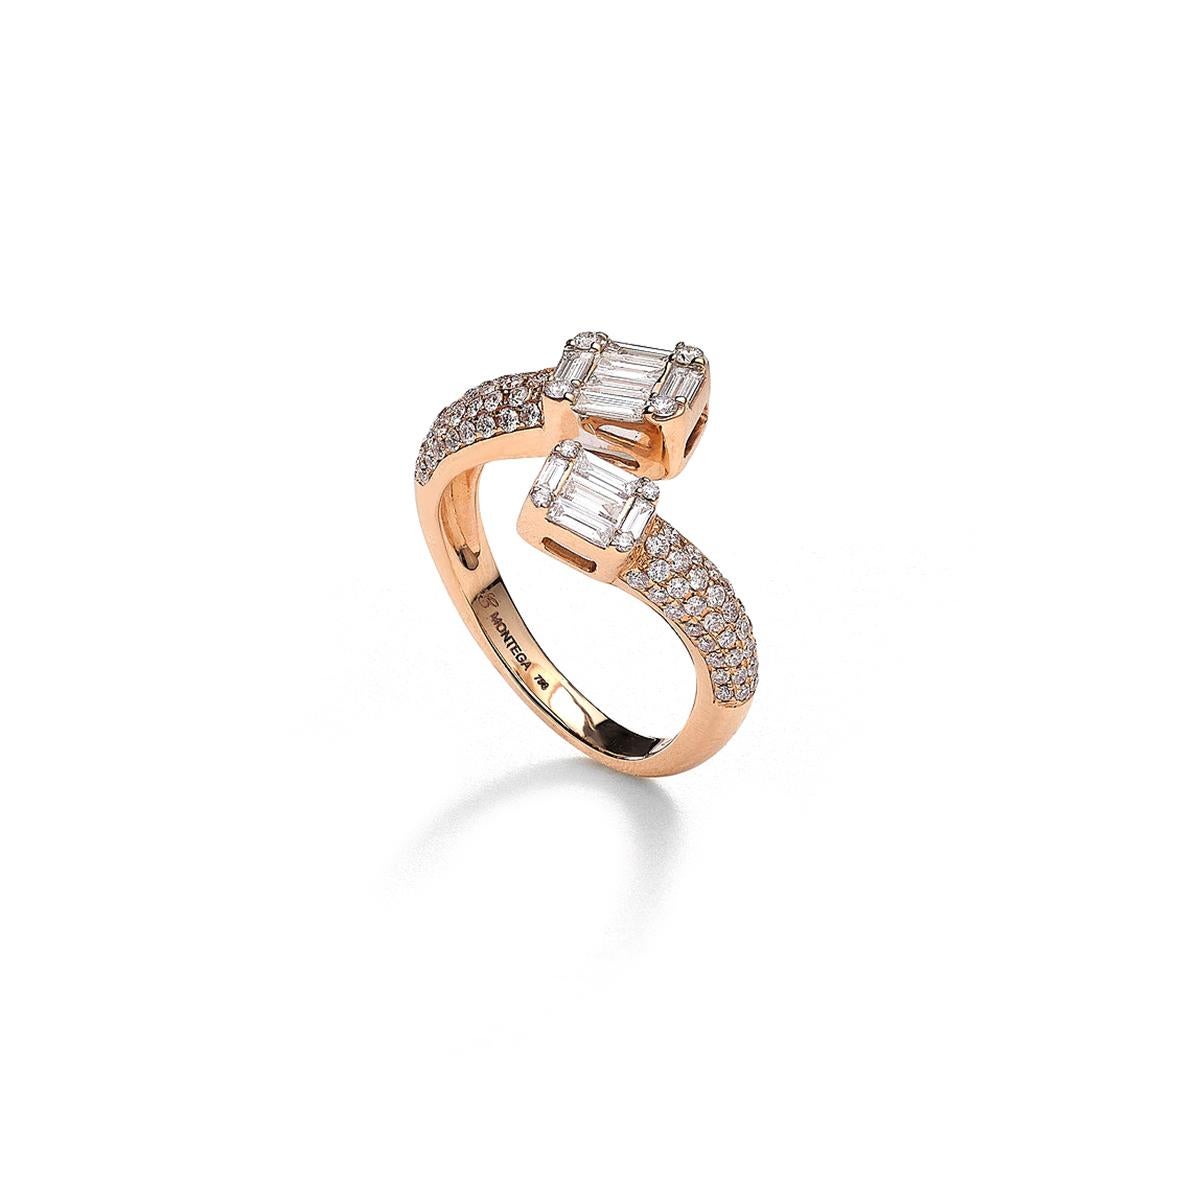 Ring in 18kt pink gold set with 13 baguette cut diamonds 0.39 cts and 81 diamonds 0.48 cts Size 53